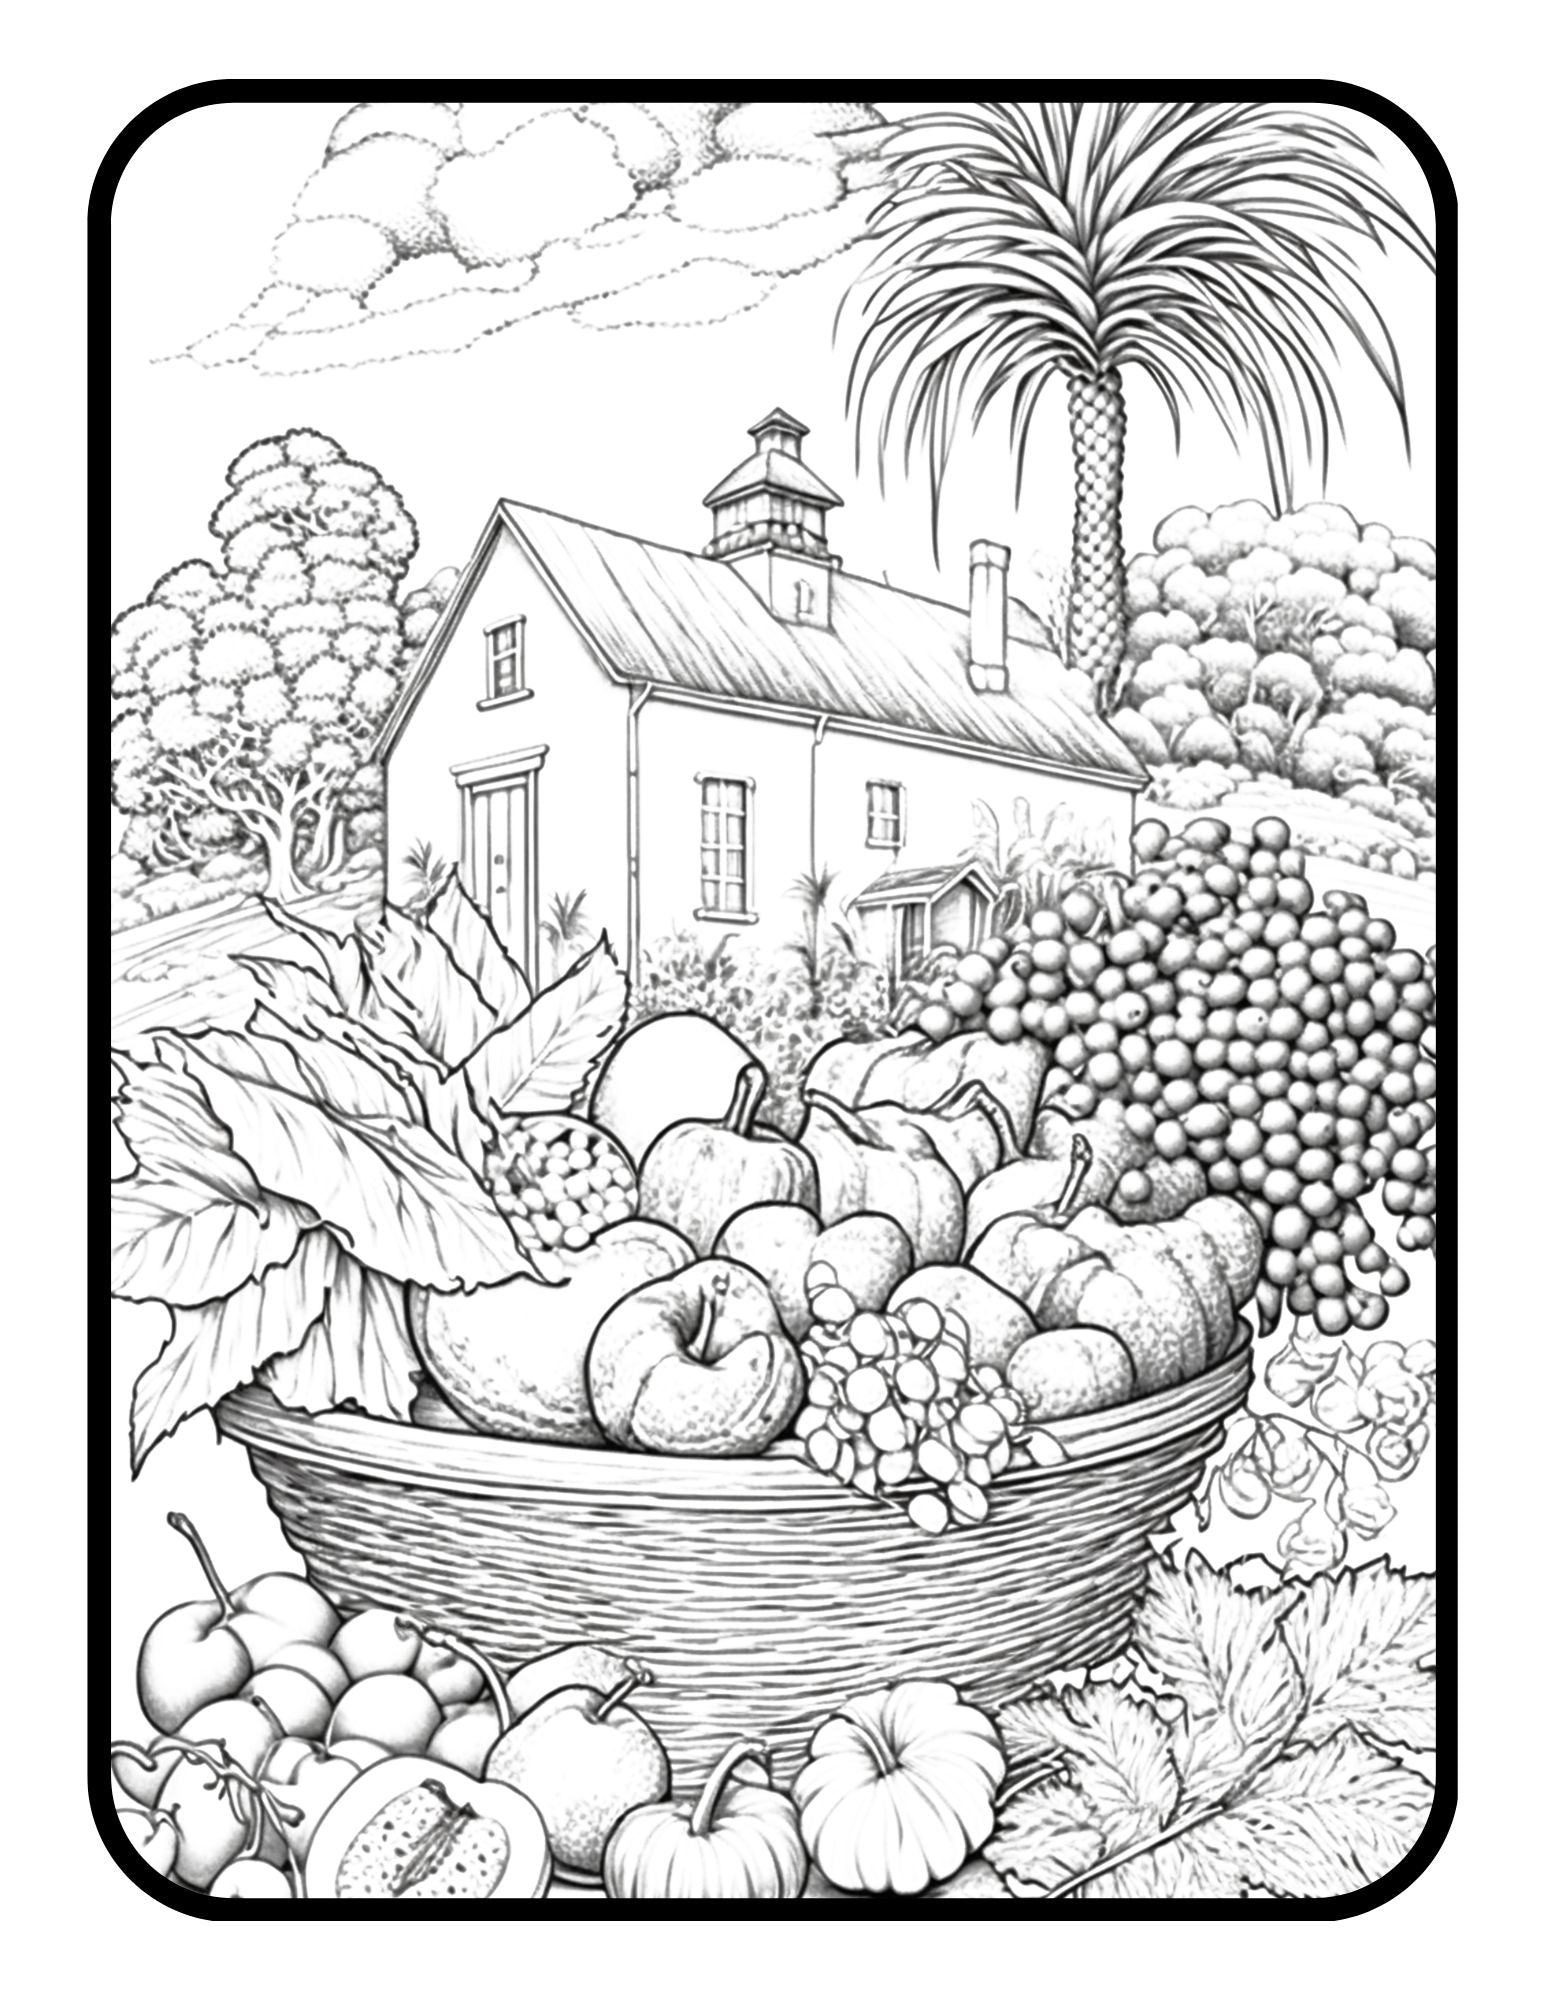 Fruit Garden Adult Colouring Book,colouring Book for Adult,colouring  Fruit,fruit Garden,printable Coloring Book Pdf,letter Size, Black Lines 